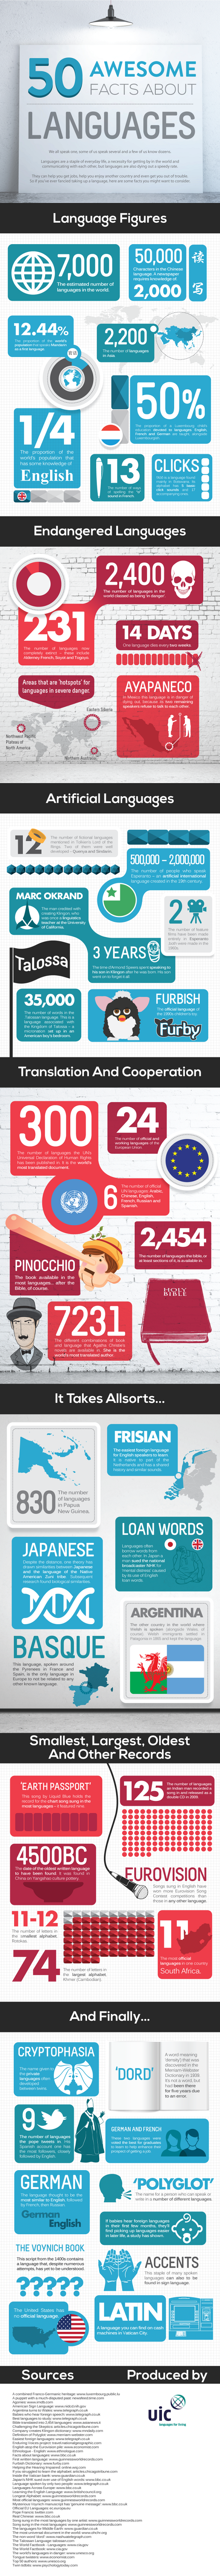 50-awesome-facts-about-languages-infographic_526a7b51b86f3